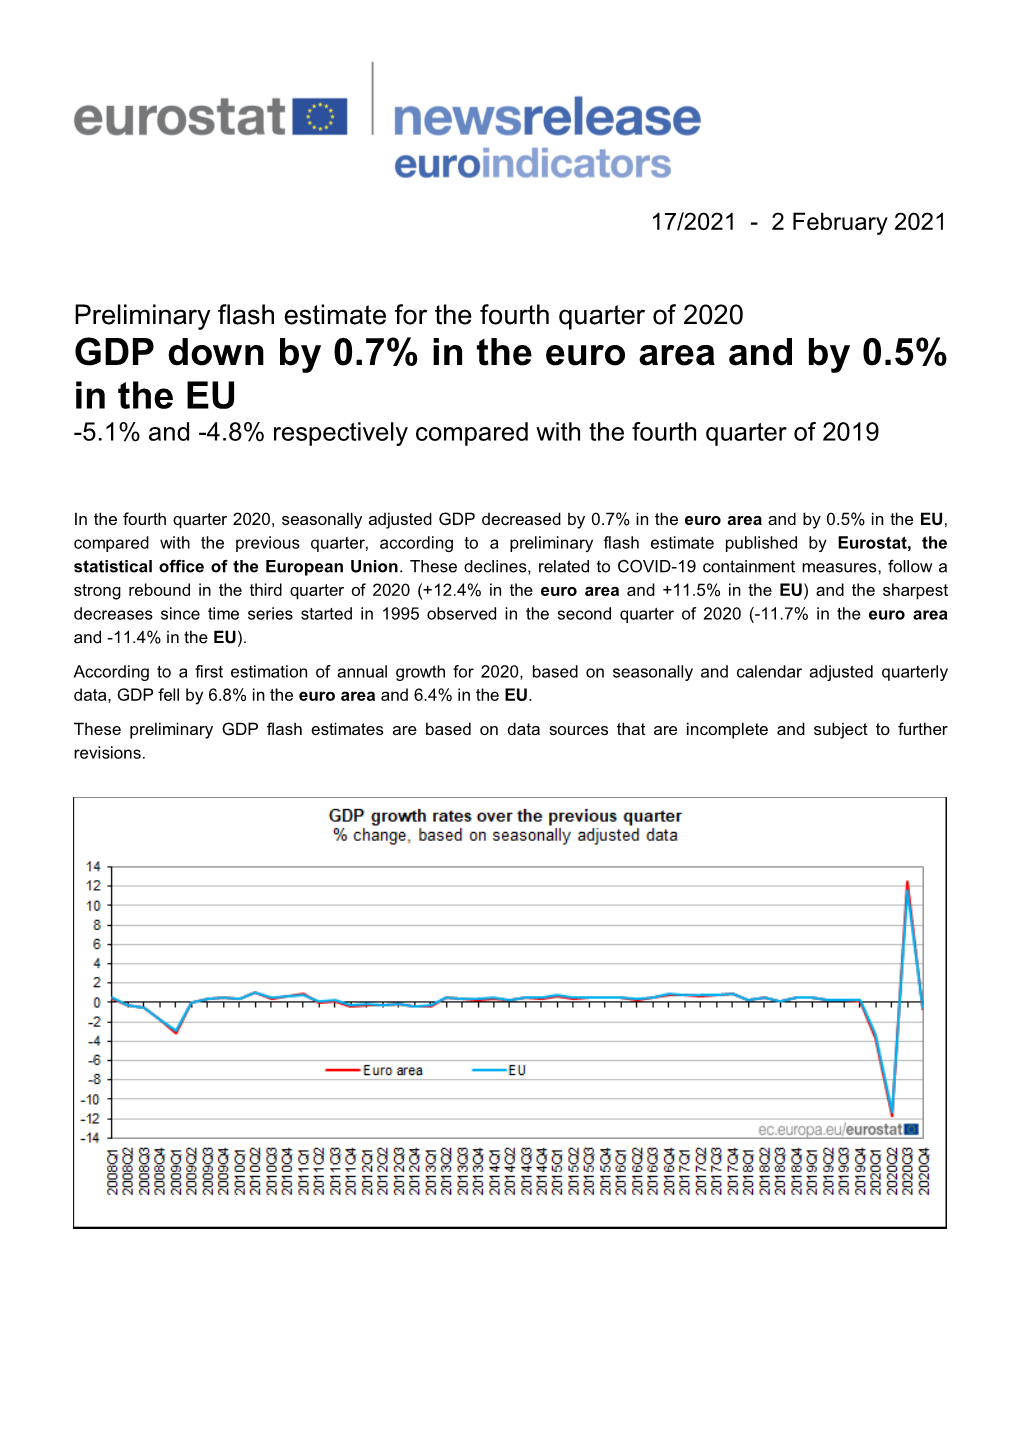 GDP Down by 0.7% in the Euro Area and by 0.5% in the EU -5.1% and -4.8% Respectively Compared with the Fourth Quarter of 2019